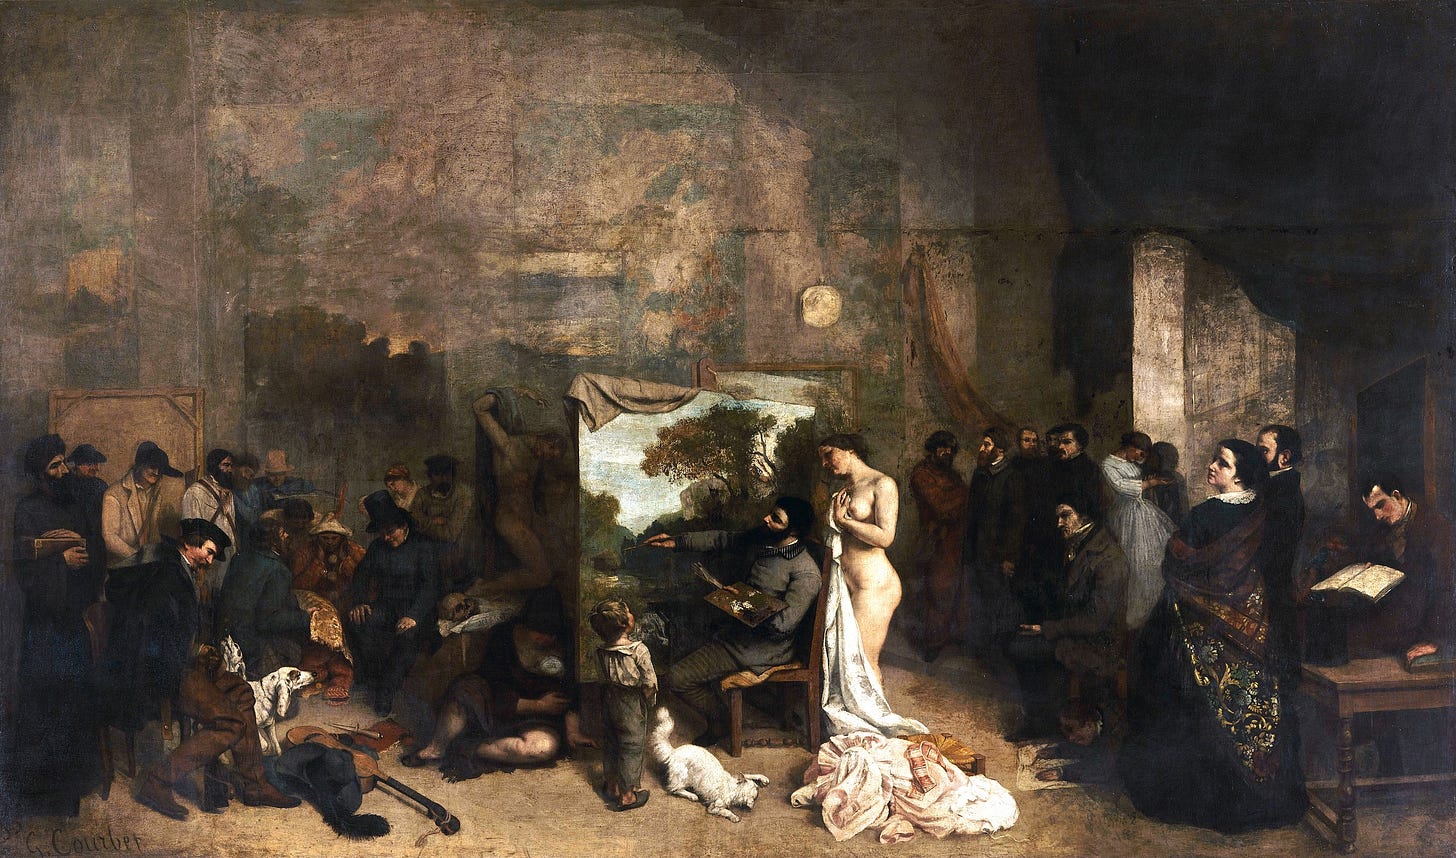 painting of an artist in his studio surrounded by people